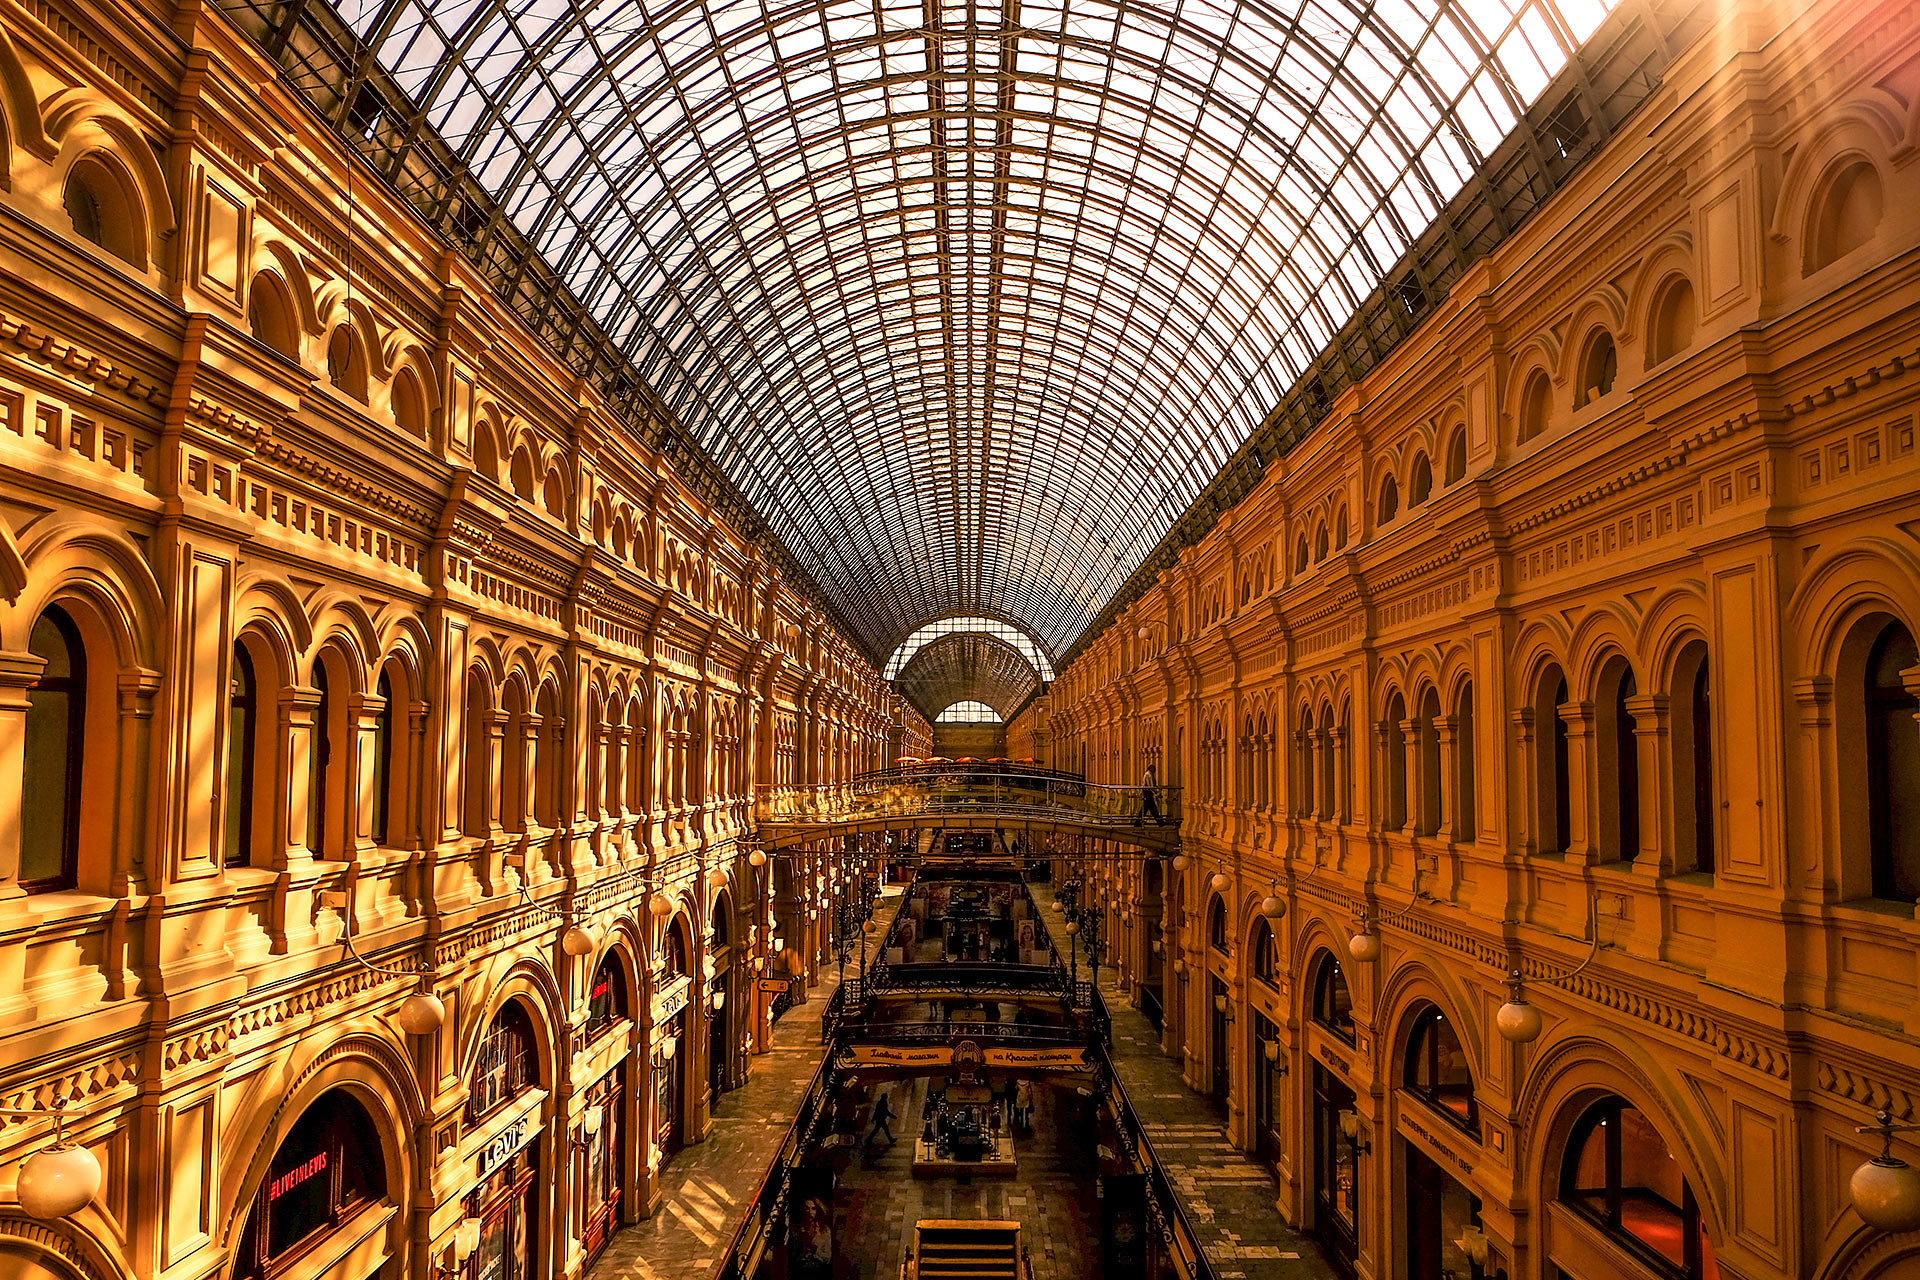 The roof of GUM, Russia's most beautiful shopping center